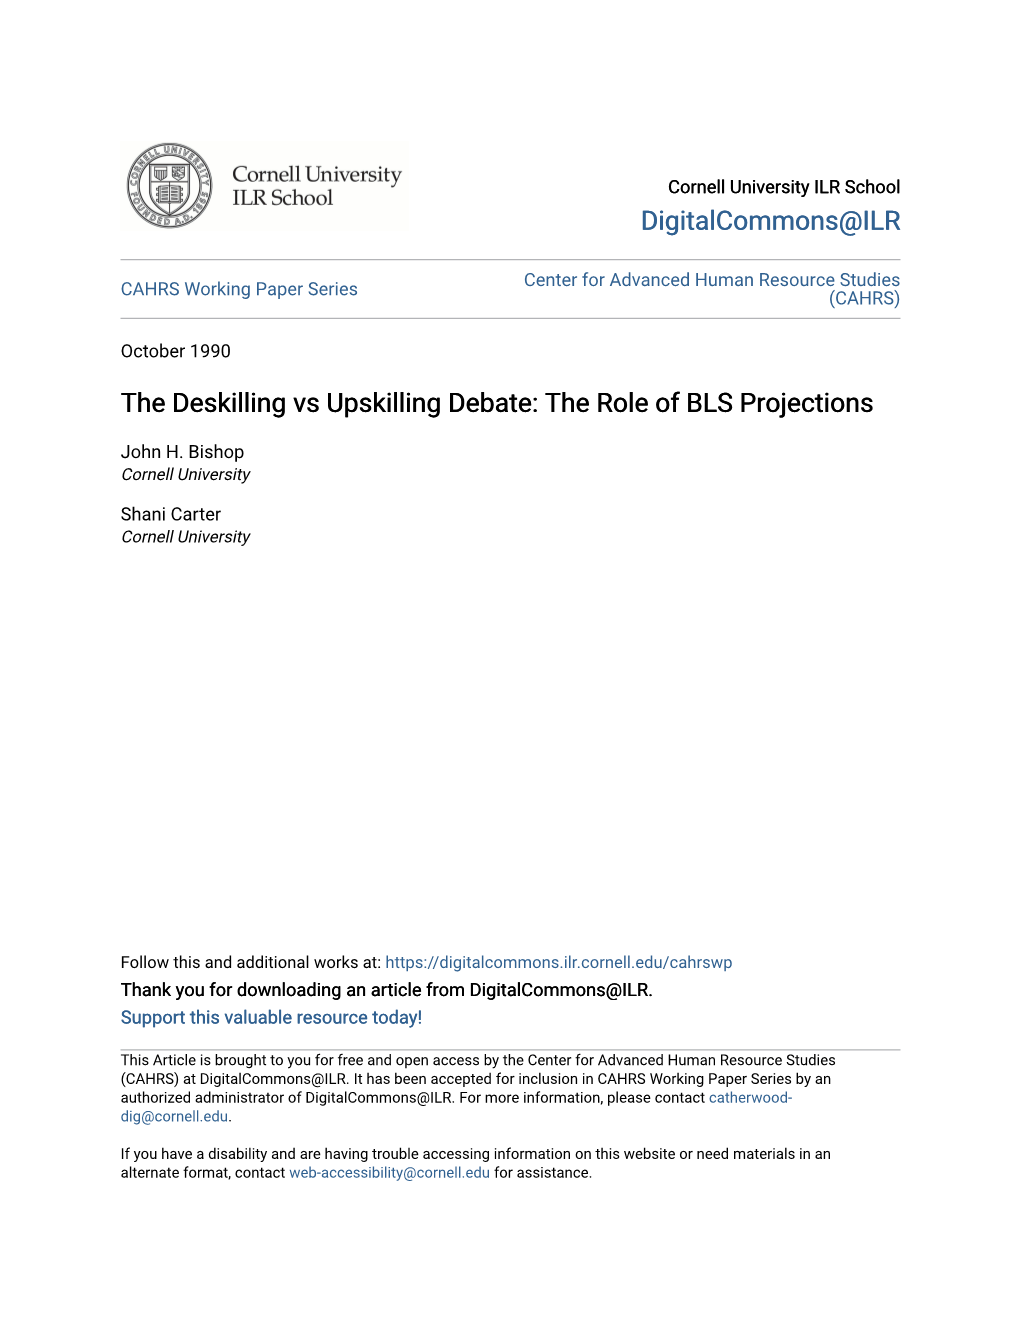 The Deskilling Vs Upskilling Debate: the Role of BLS Projections